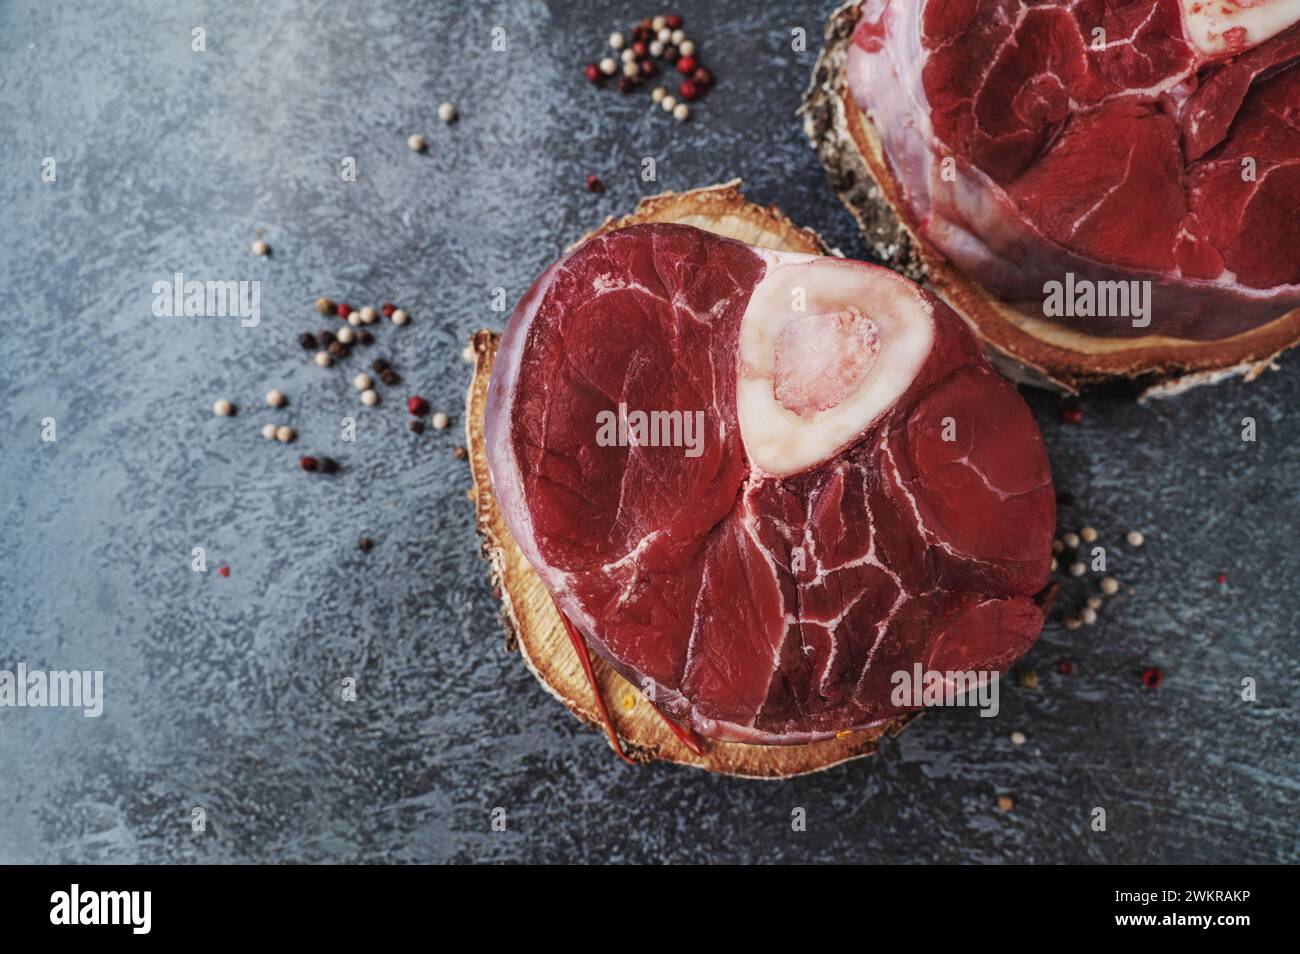 raw Ossobuco. Veal shanks Ossobuco with pepper, lemon and garlic for gremolata, typical ingredients of Italian Lombard cuisine, top view on dark backg Stock Photo